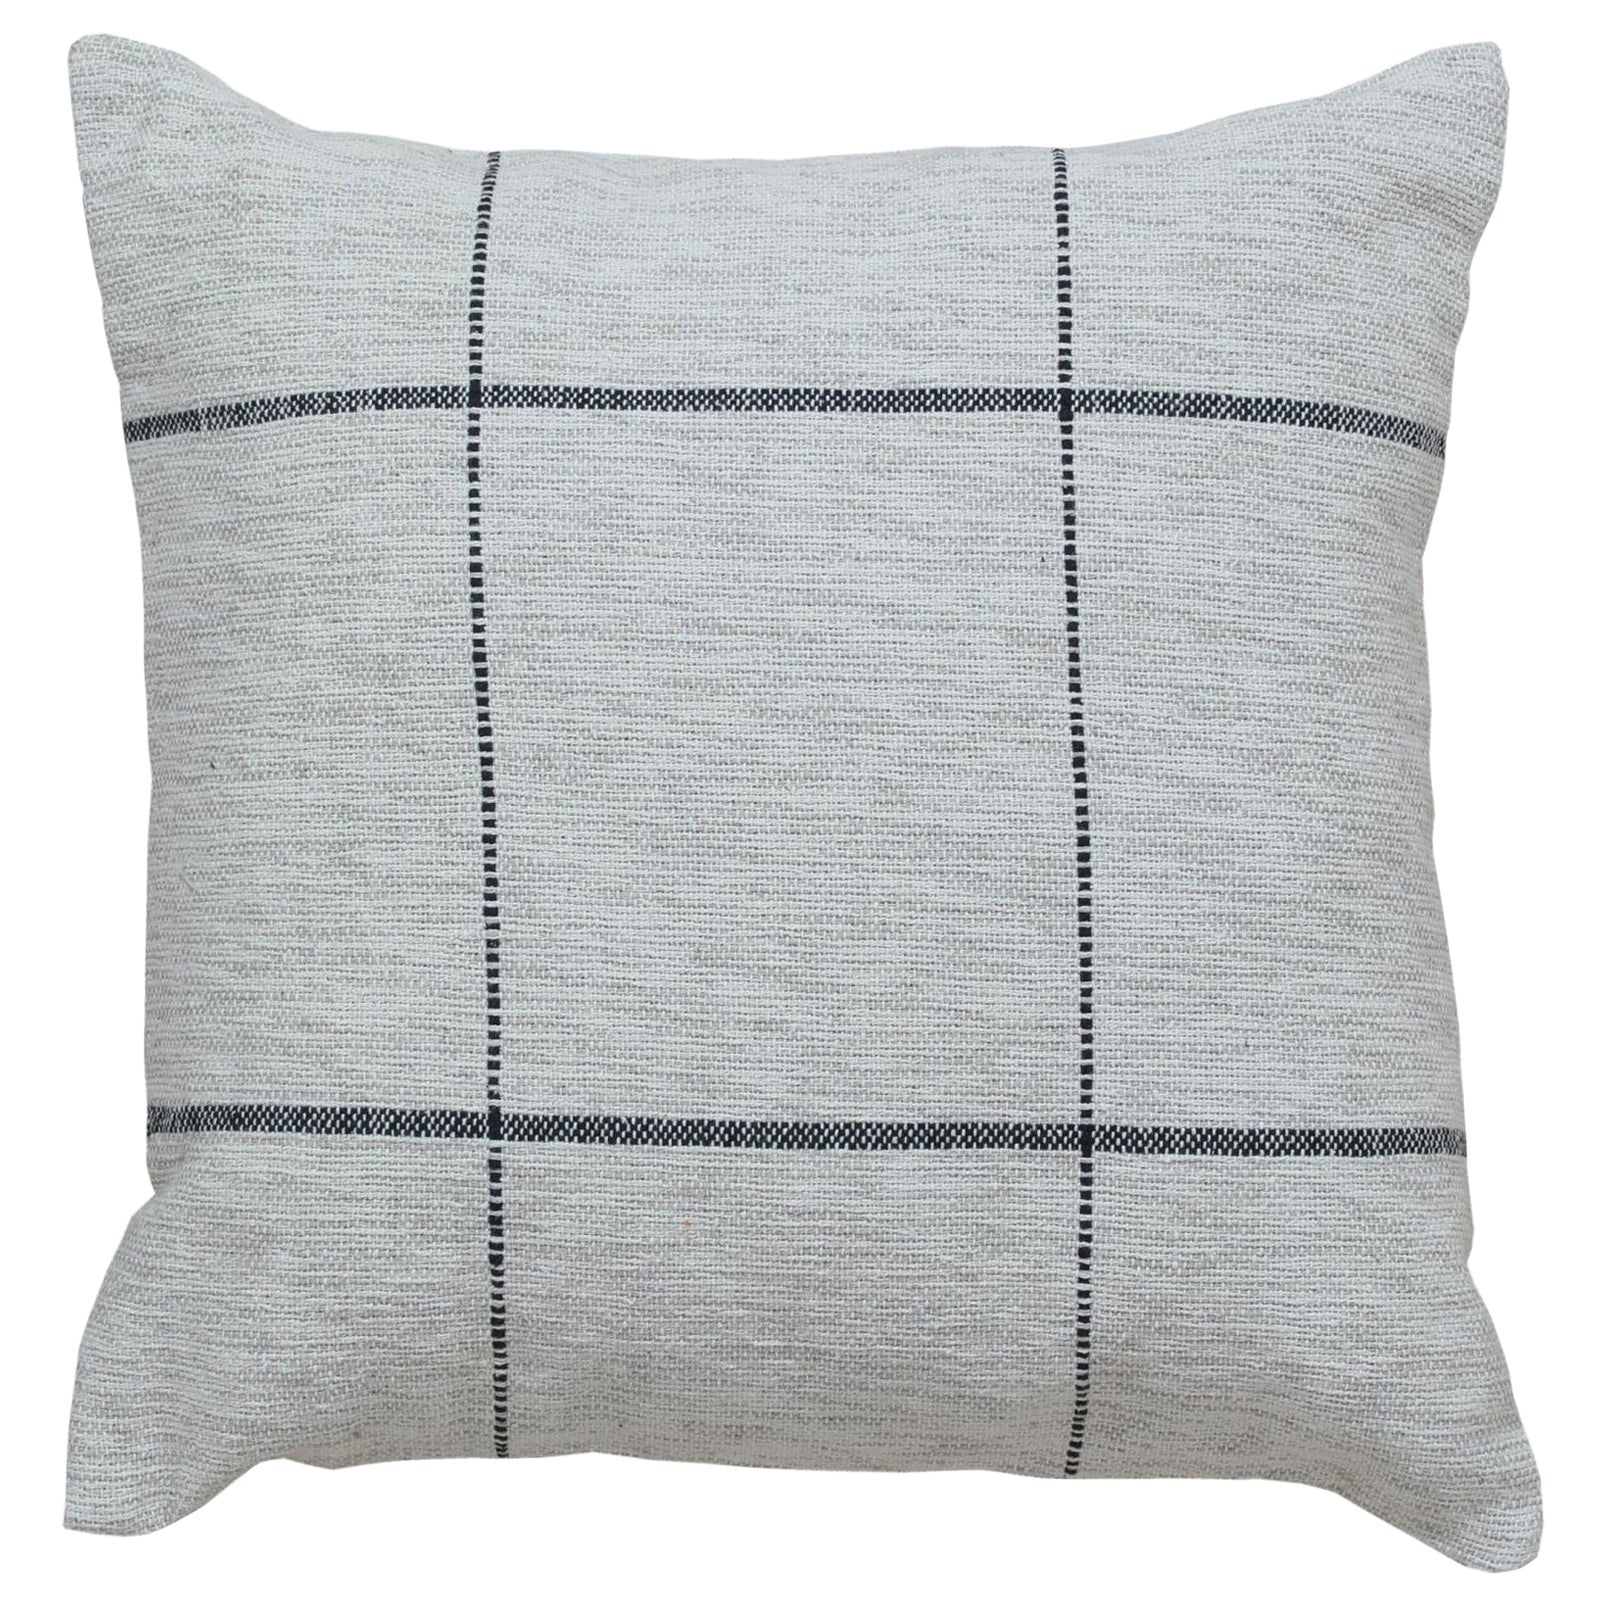 Contemporary Wool and Cotton Pillow In Gray and Beige with Geometric Parttern For Sale